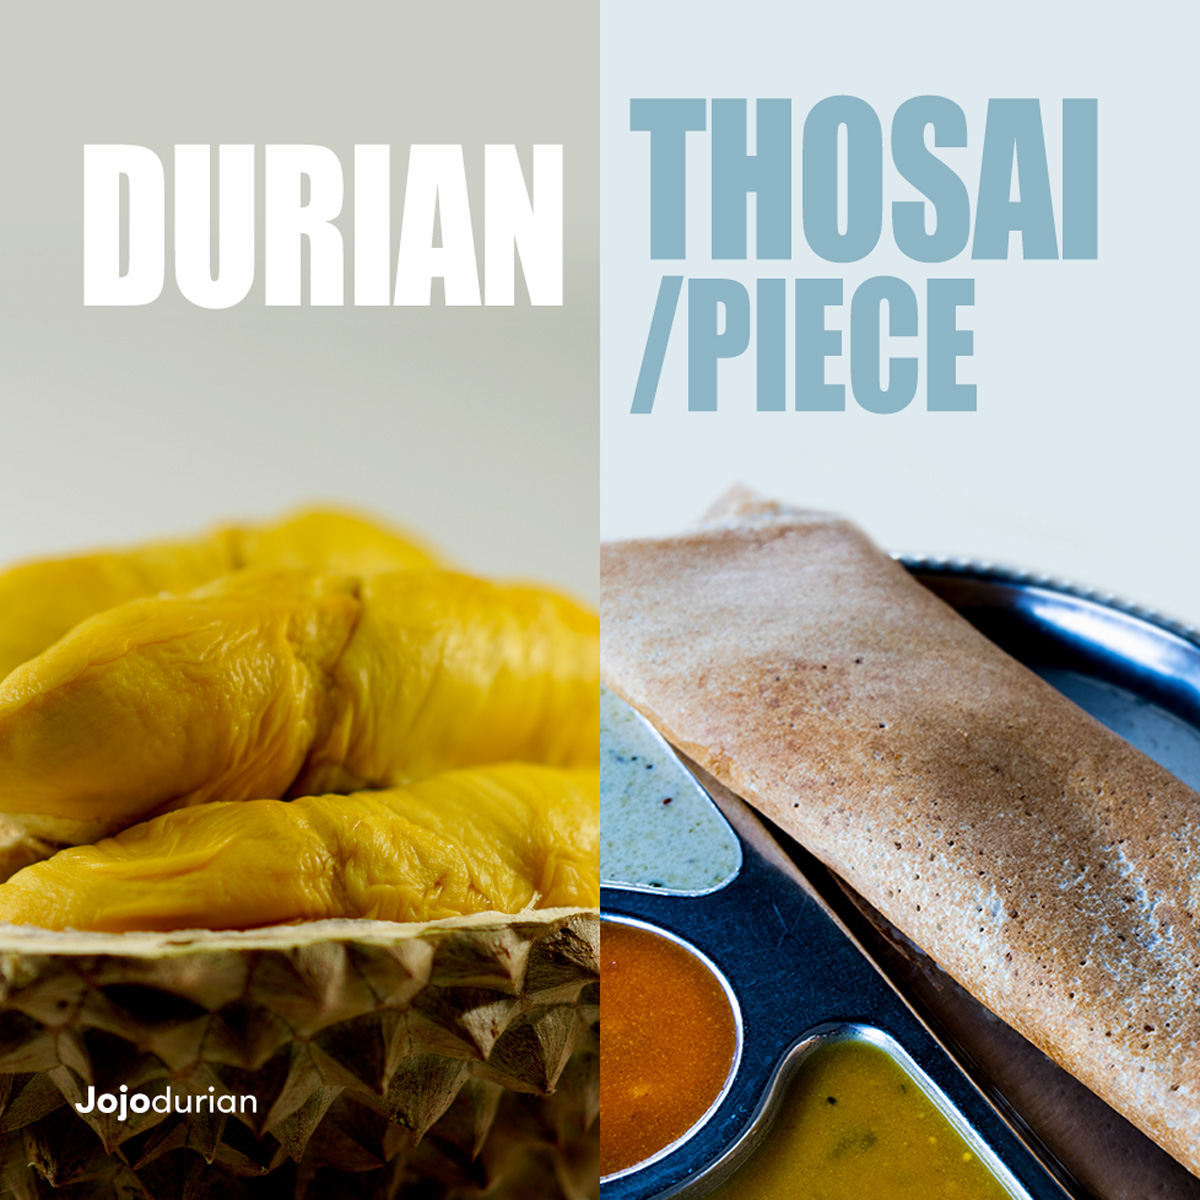 Meal Replacement: Durian vs Thosai